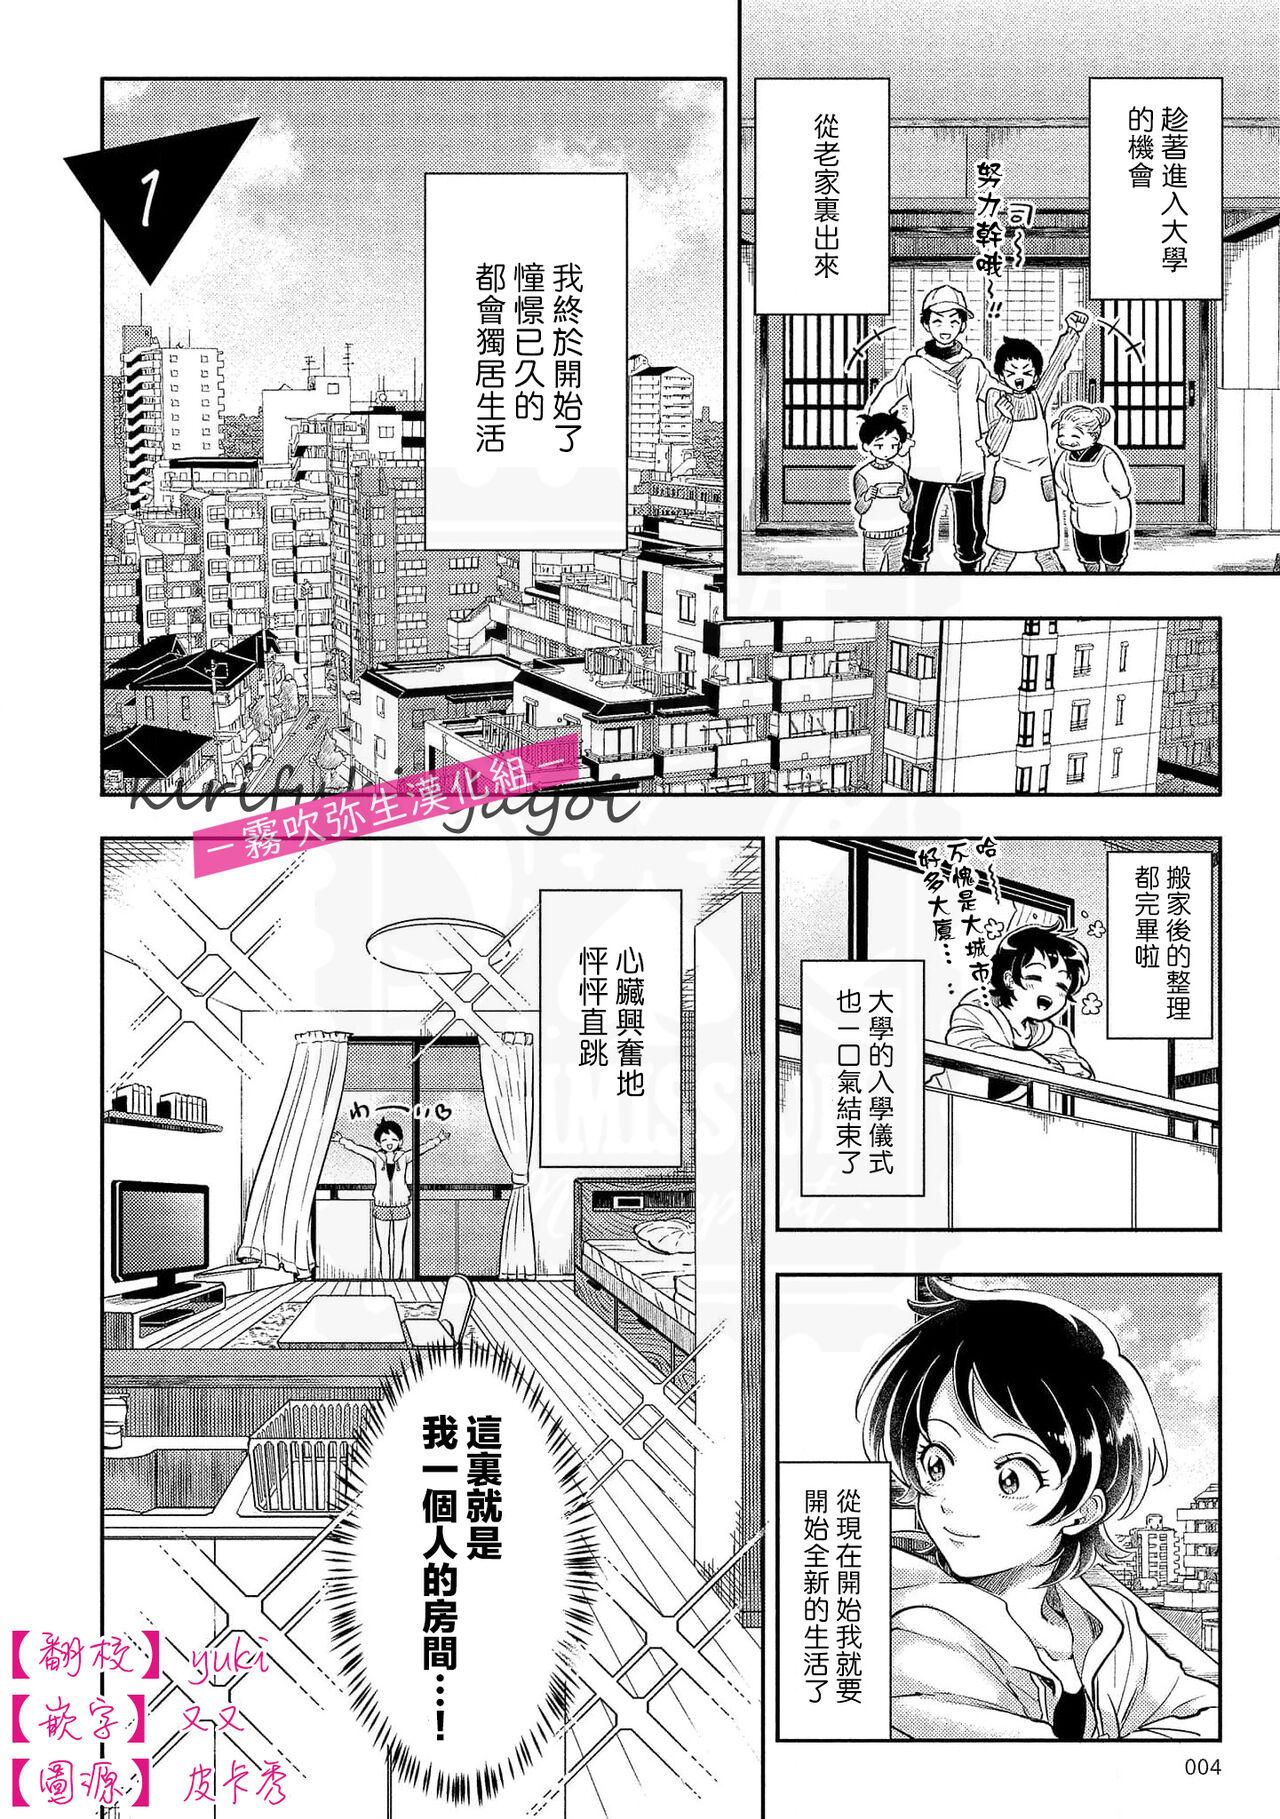 Shaven 你會對我負責的吧？ Game - Page 3